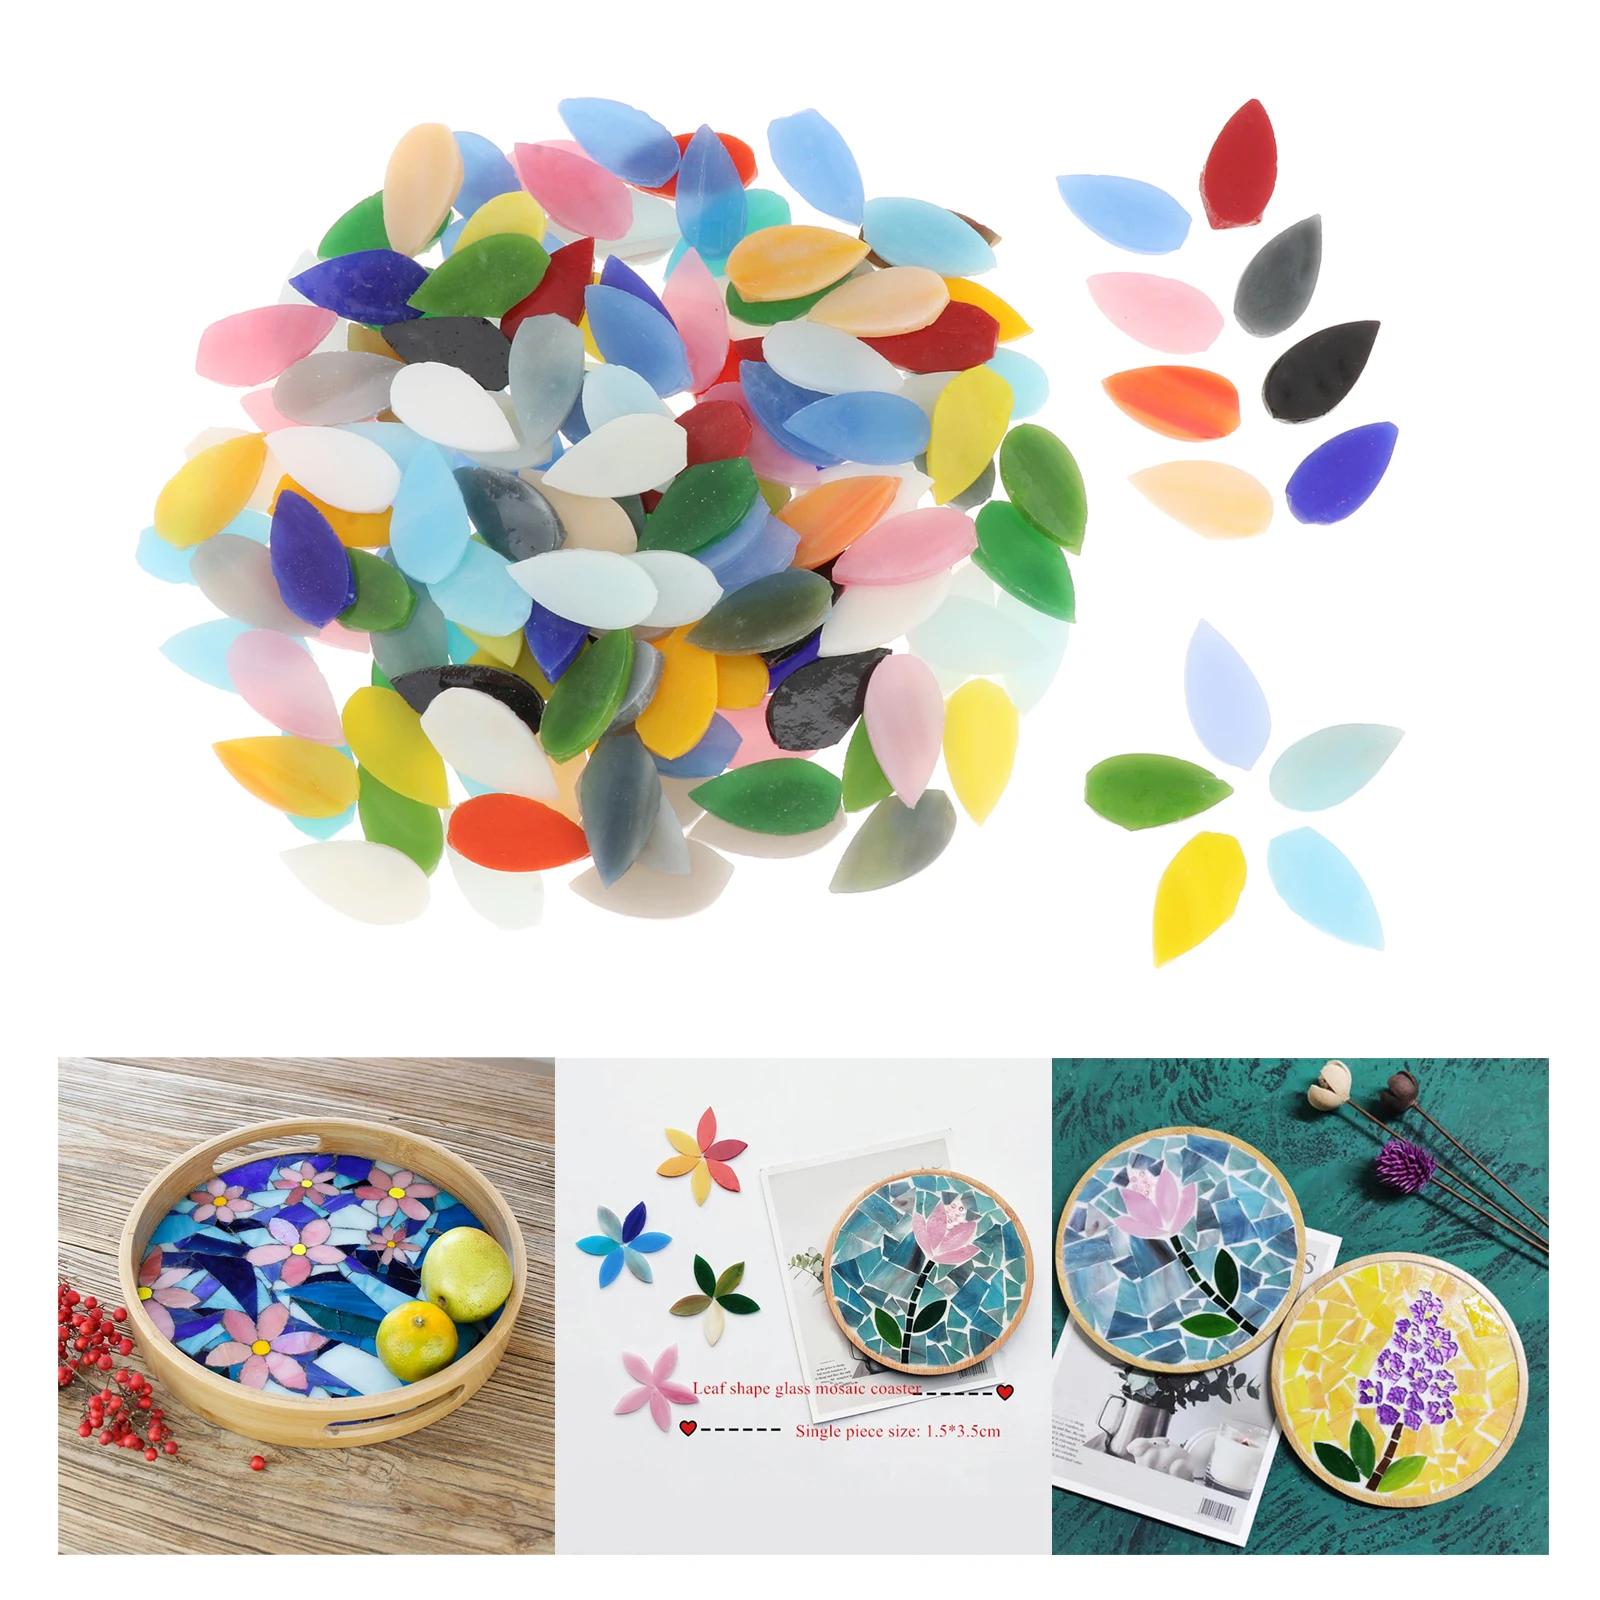 150x Assorted Colors Water Drop Mosaic Tiles Flower Leaves for Art Crafts Pots Stepping Stones Decoration